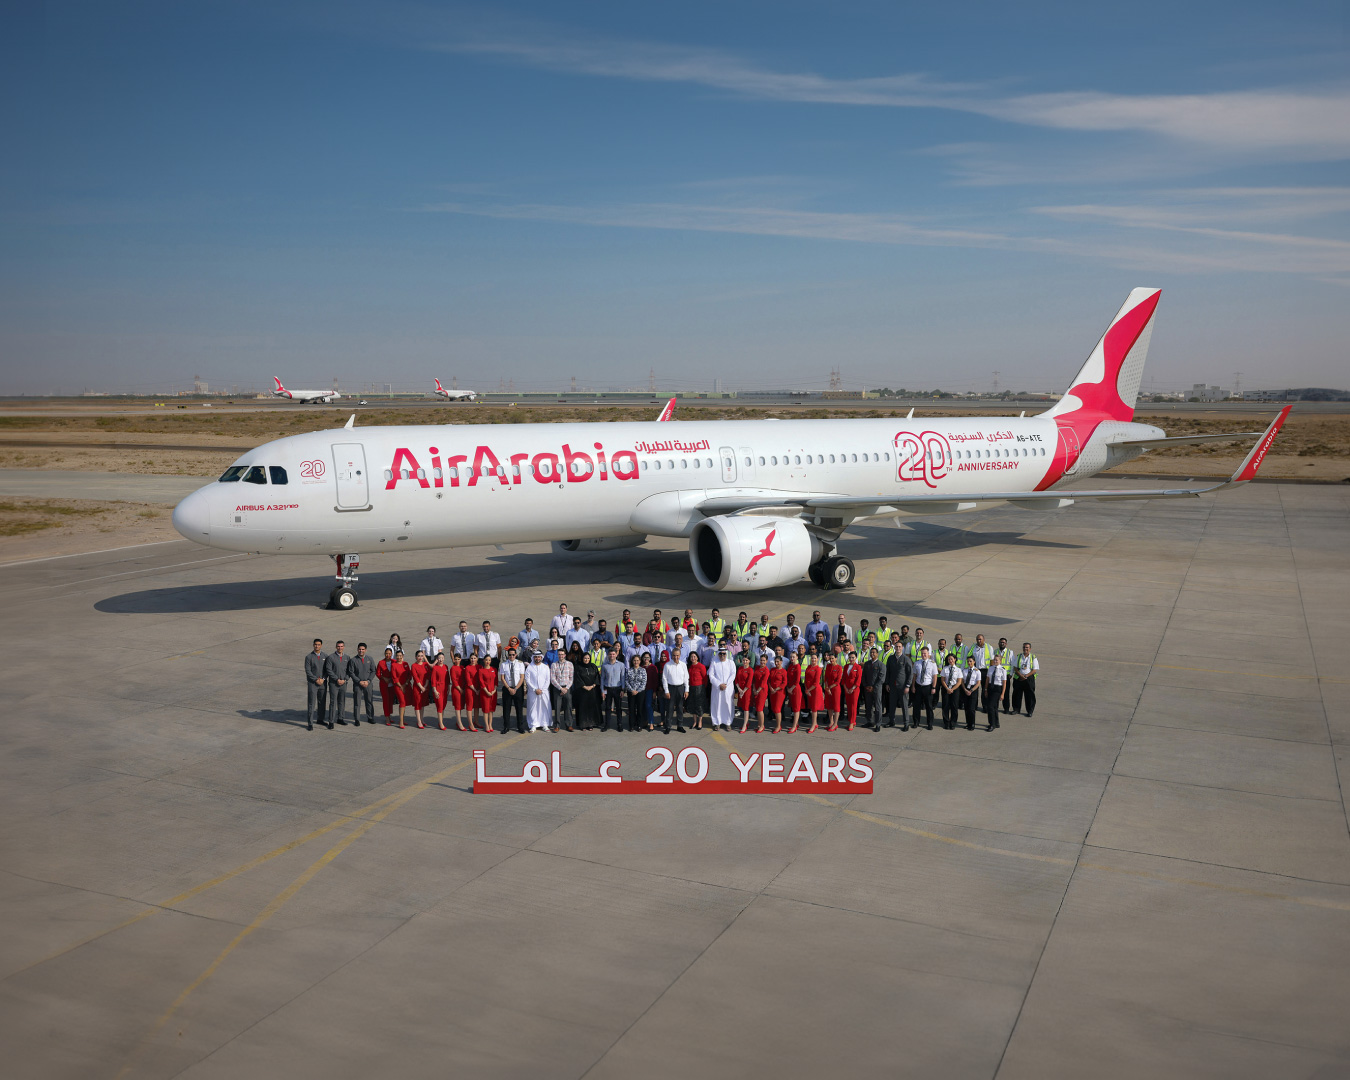 Air Arabia has announced plans to open a new route connecting Sharjah International Airport in the UAE with Phuket International Airport in Thailand.